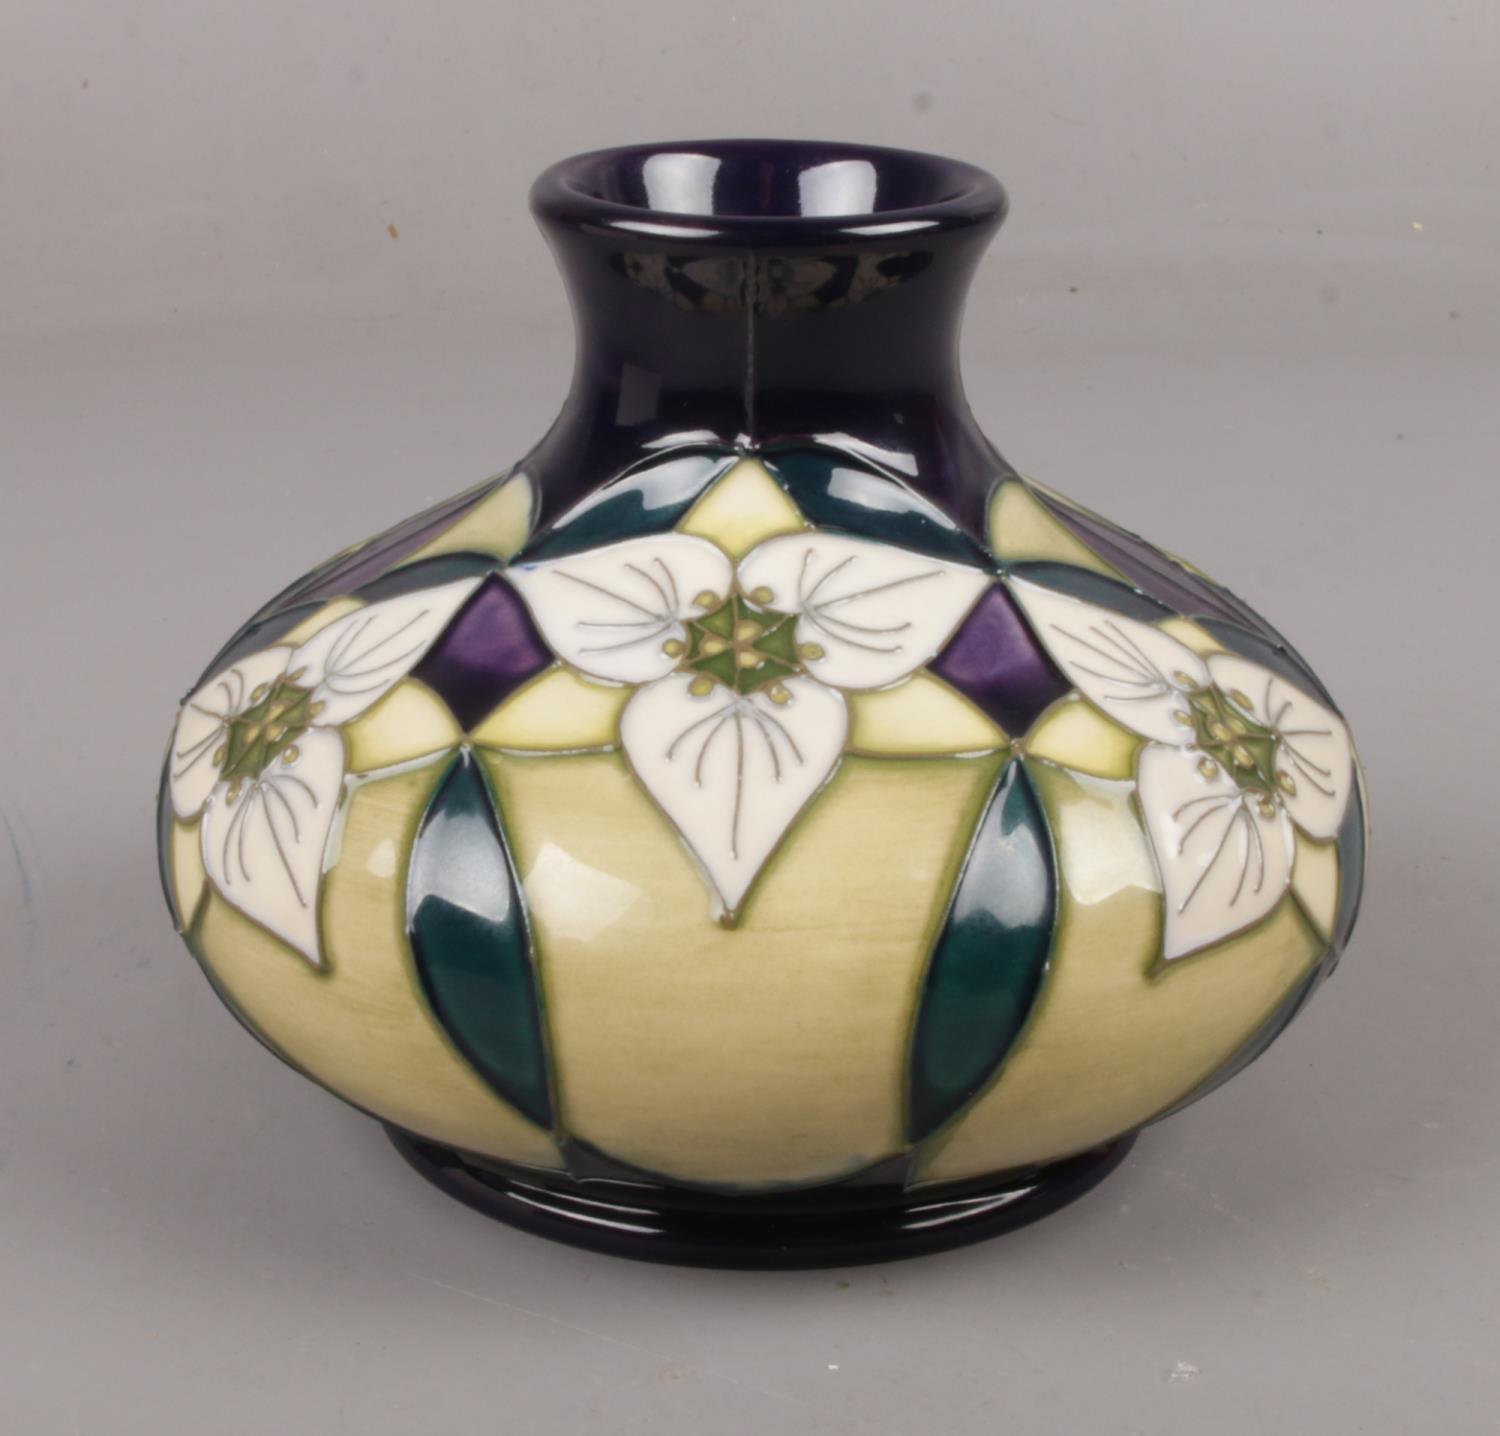 A Moorcroft Trial ' Trillium' vase, dated 15.1.02, 12cm height, impressed with marks on base Good